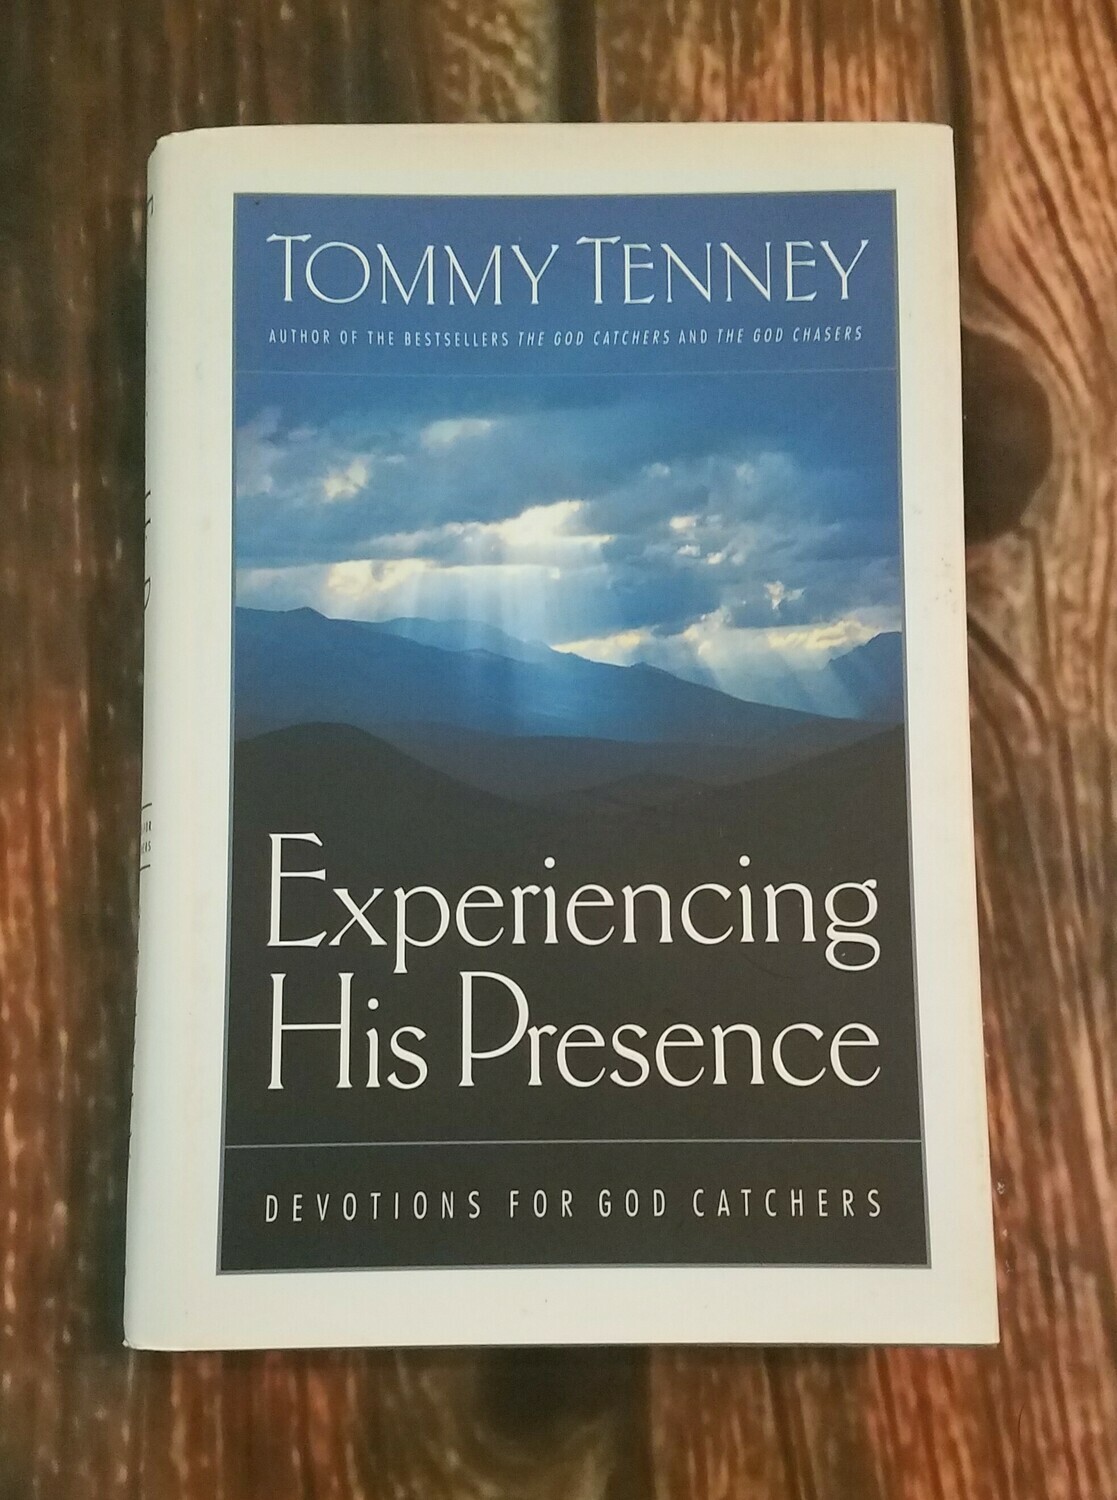 Experiencing His Presence by Tommy Tenney